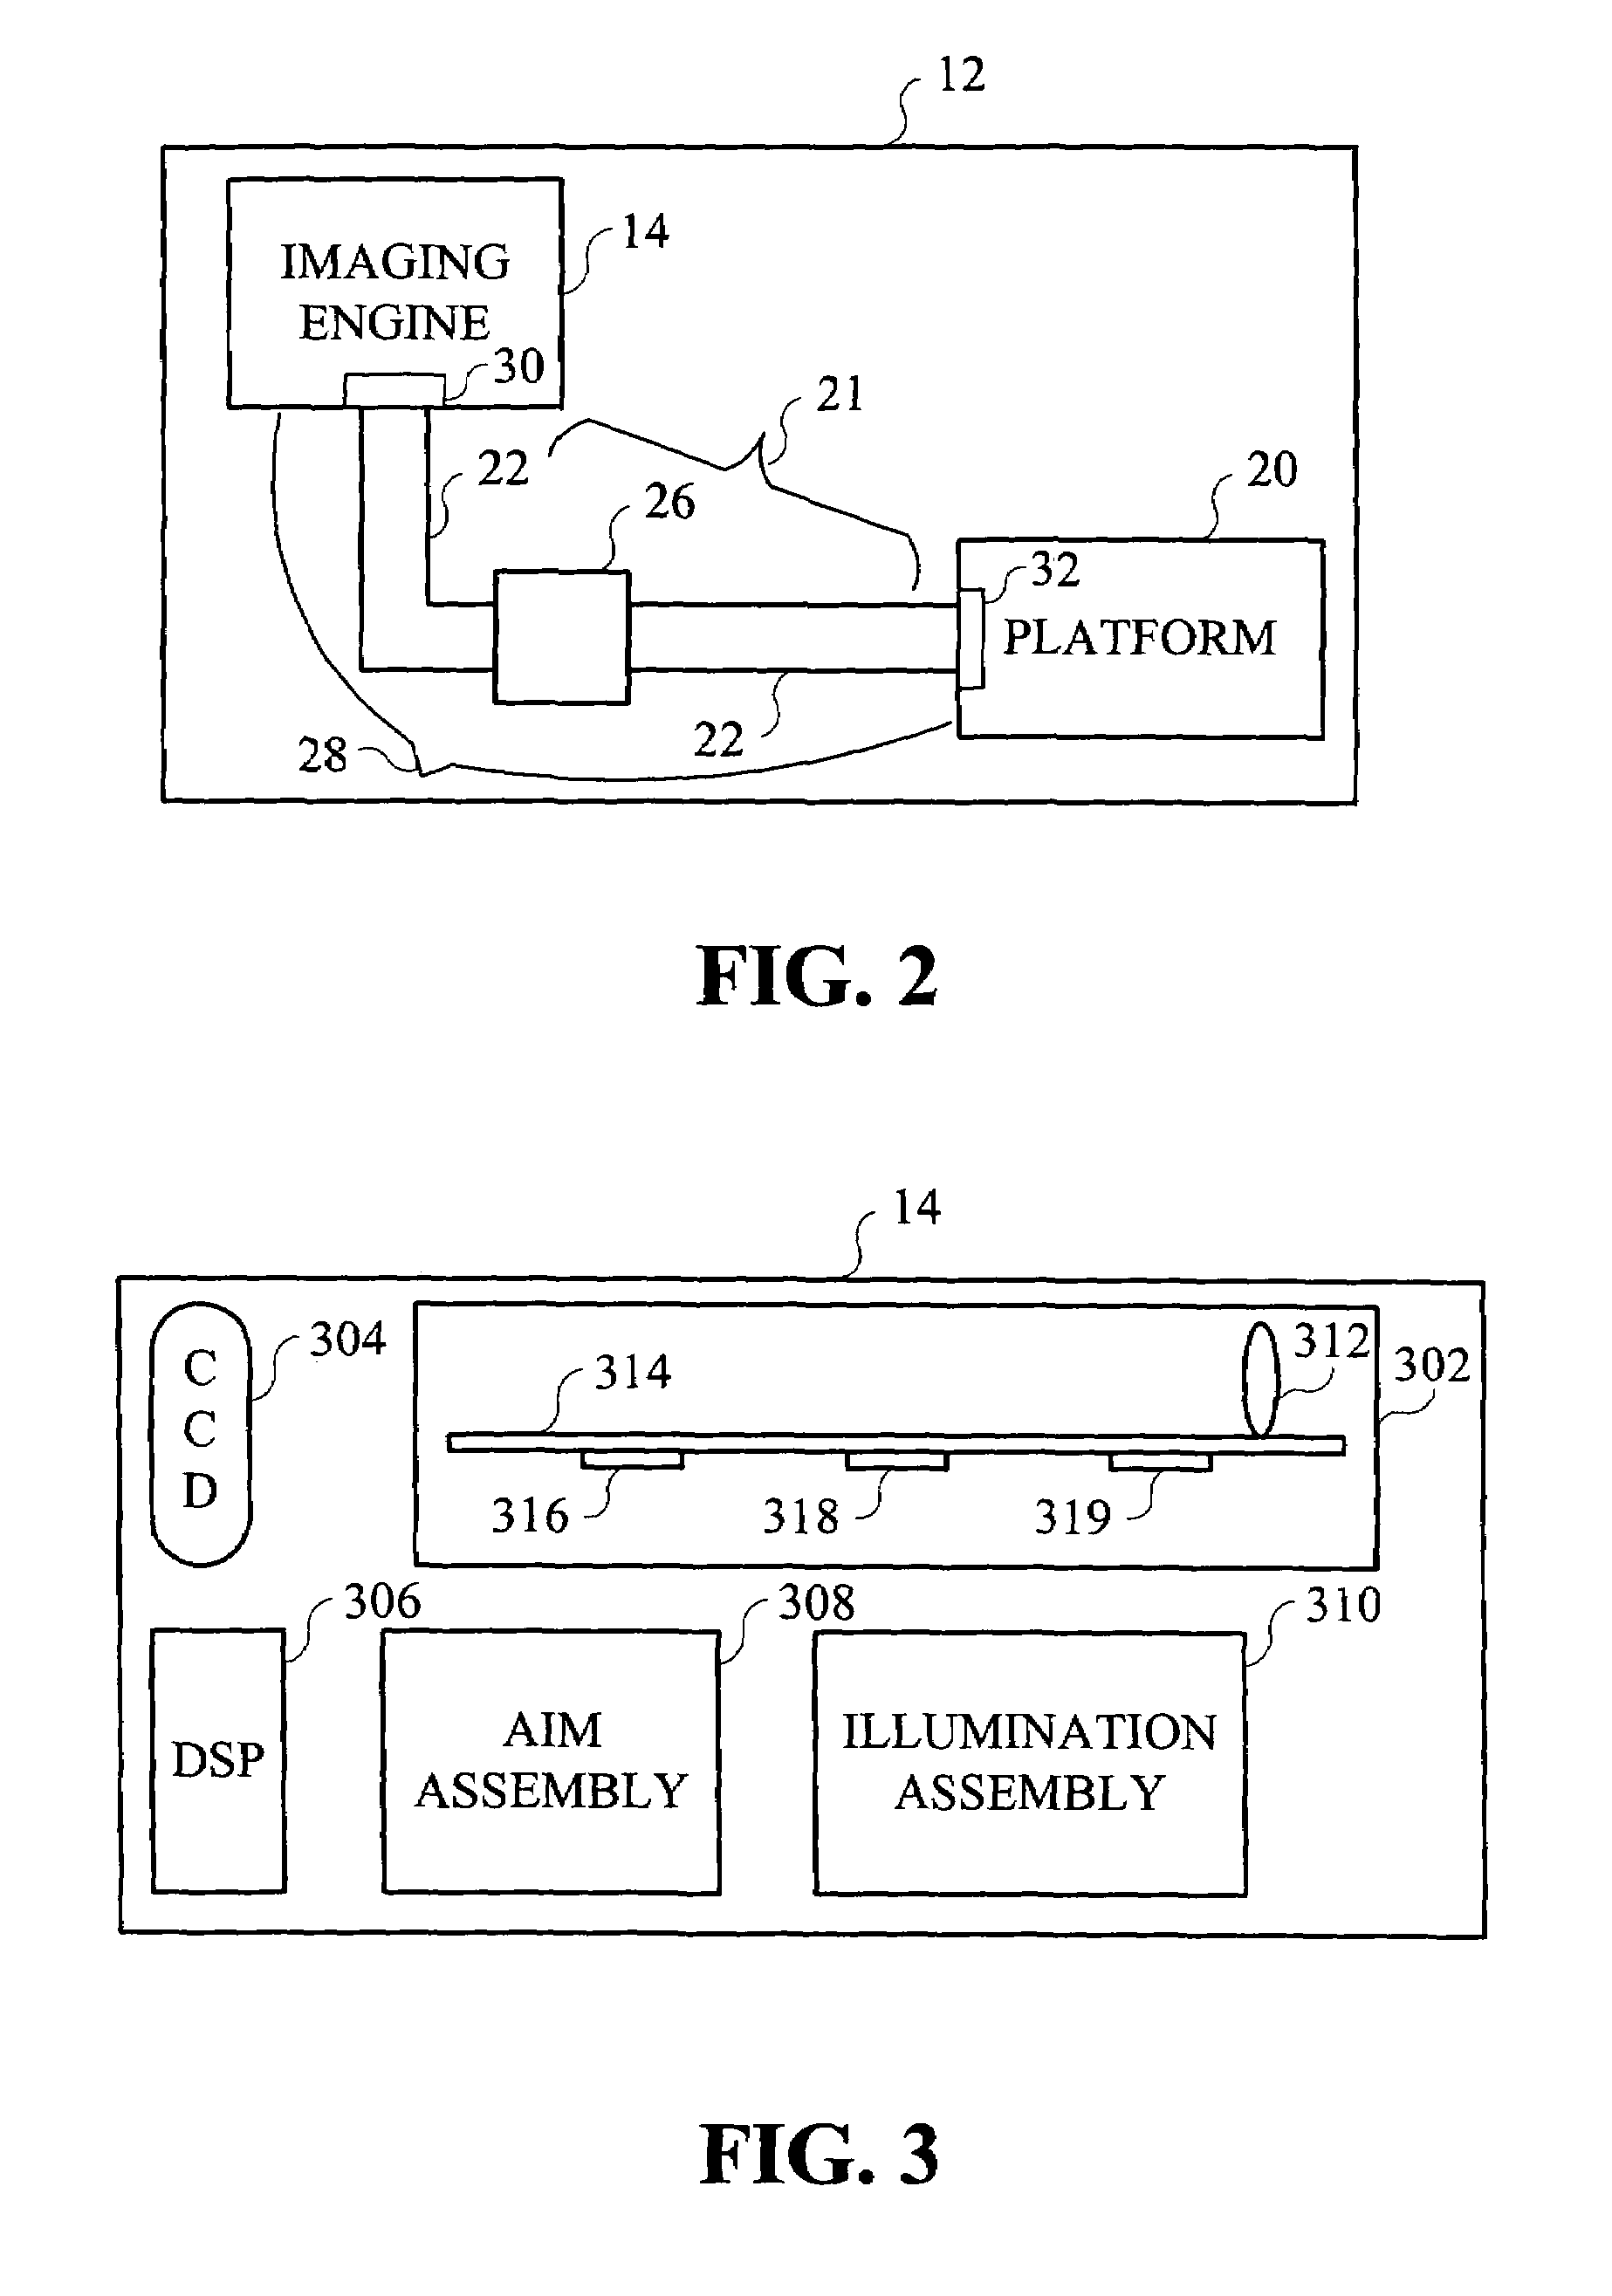 Interface for interfacing an imaging engine to an optical code reader